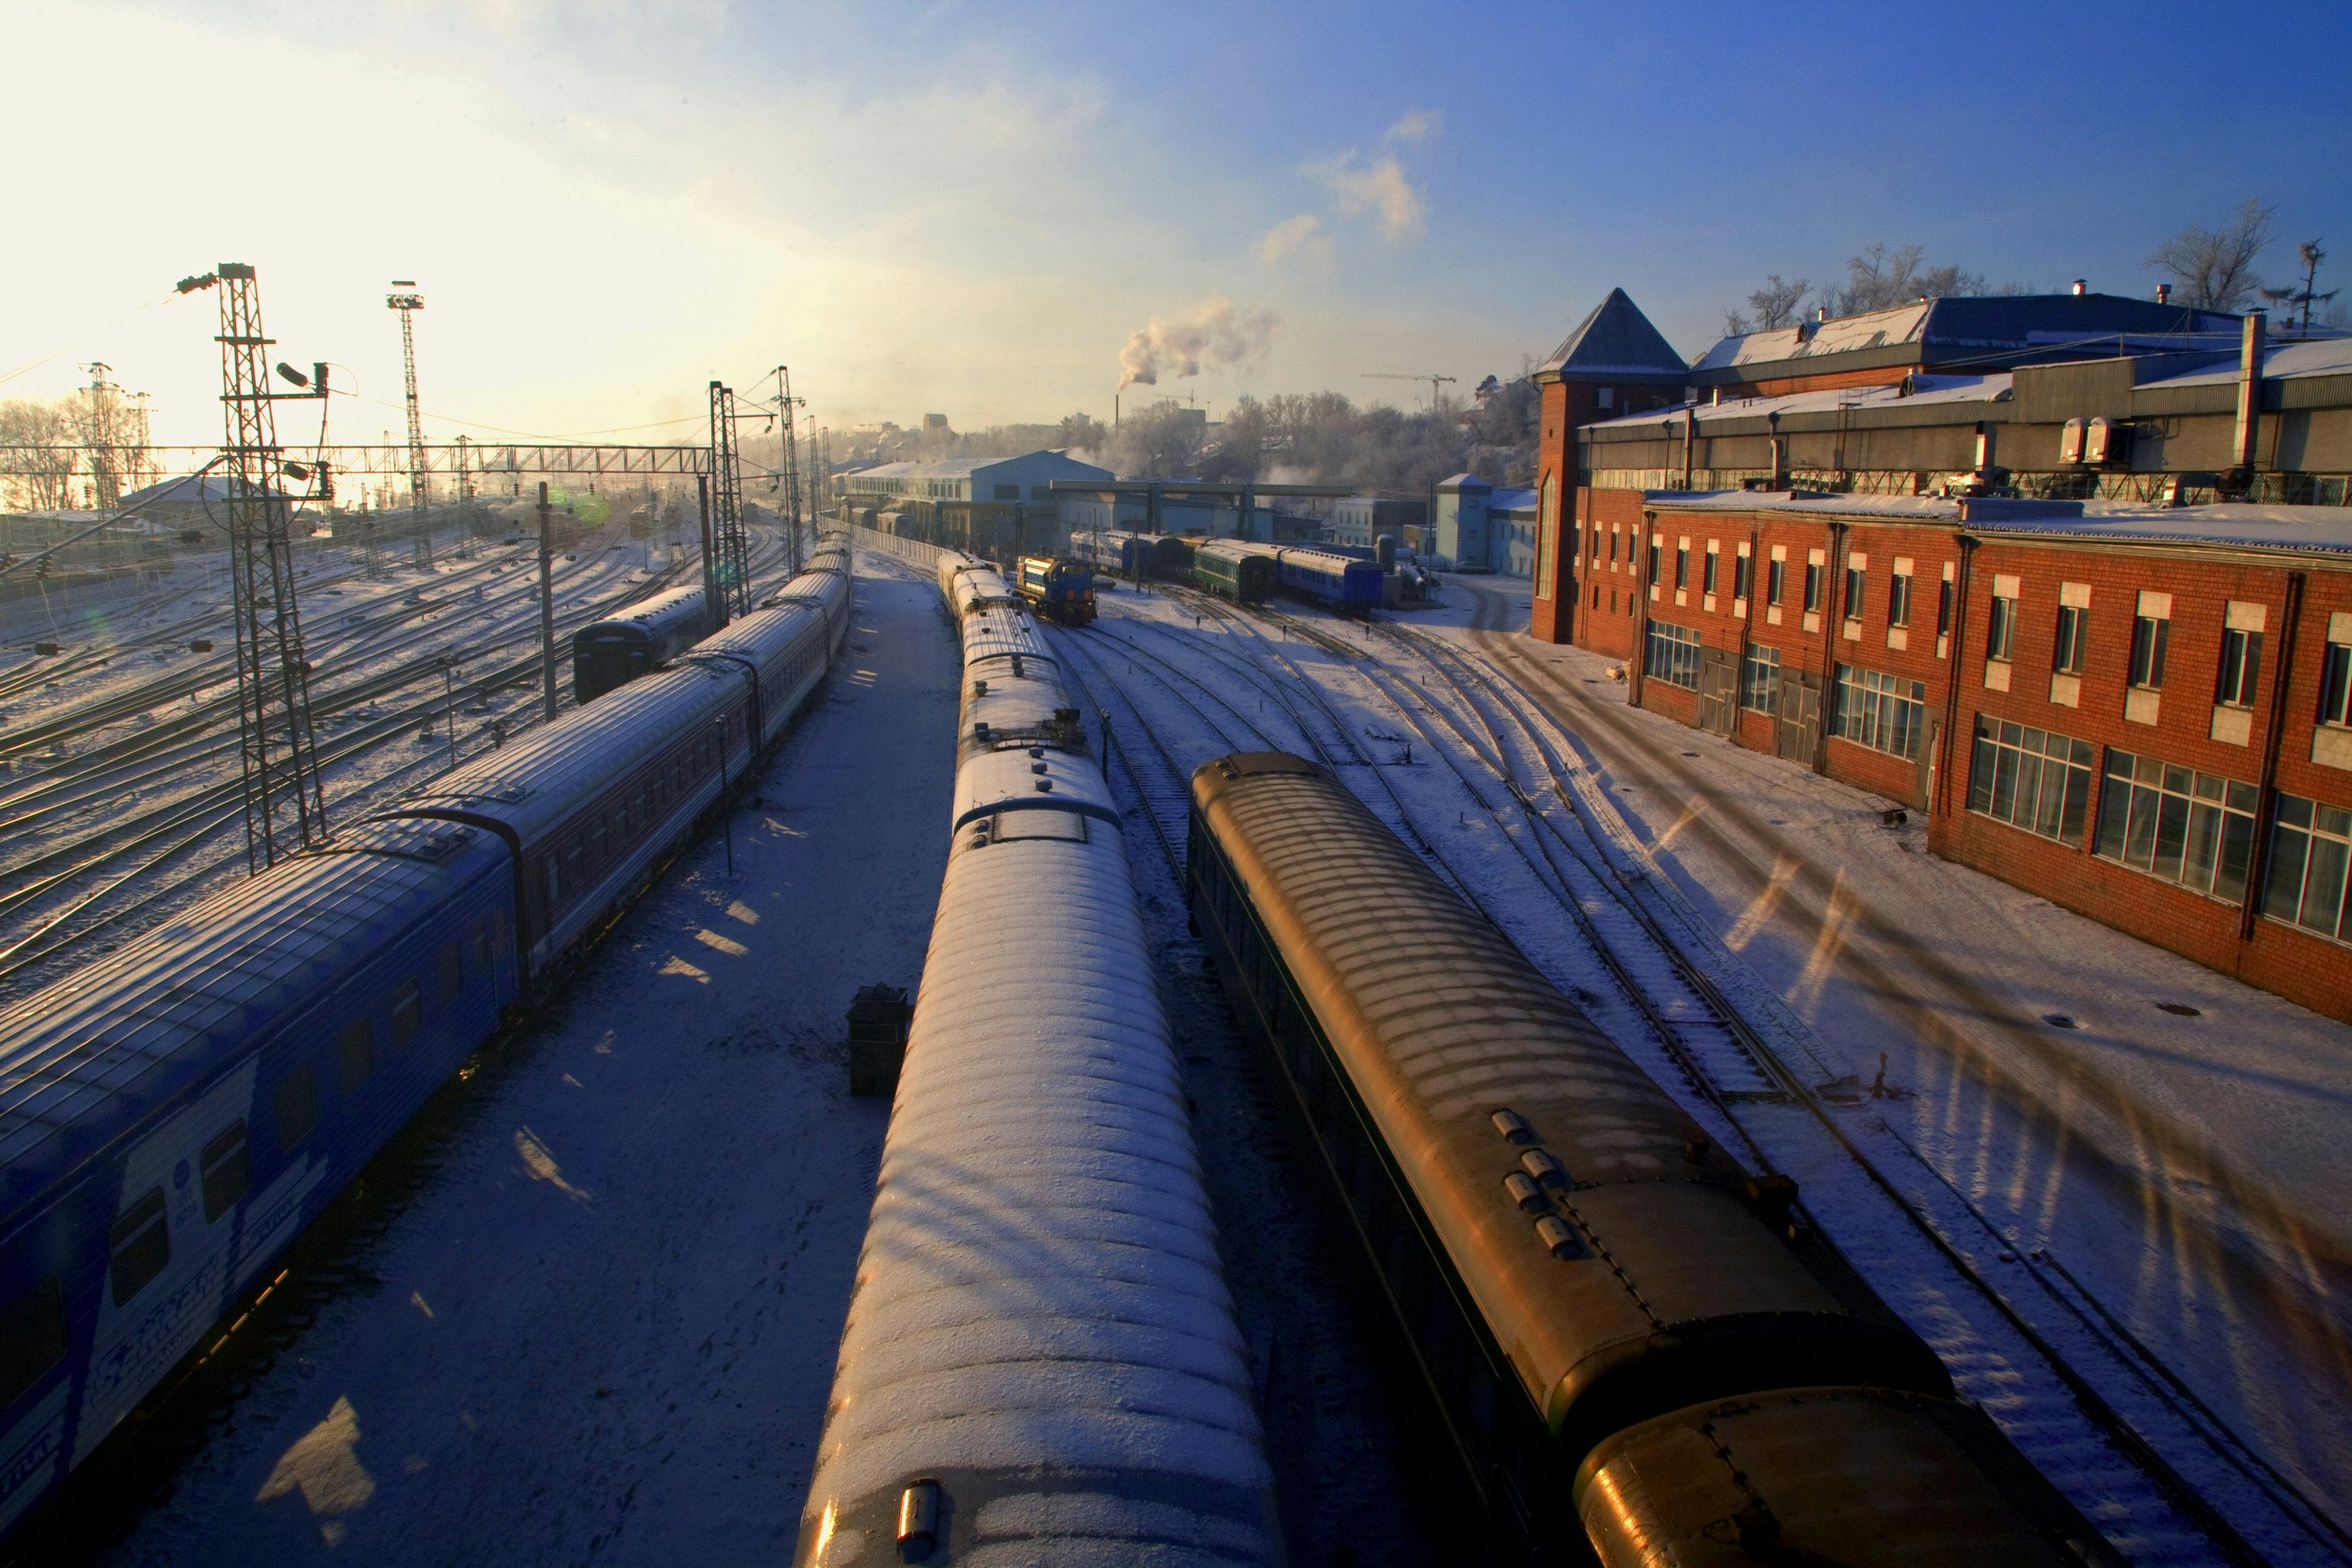 Three trains lined up on the tracks next to a red-brick train station. Snow lies on the grounds and between the tracks, and the sun is low in the sky.